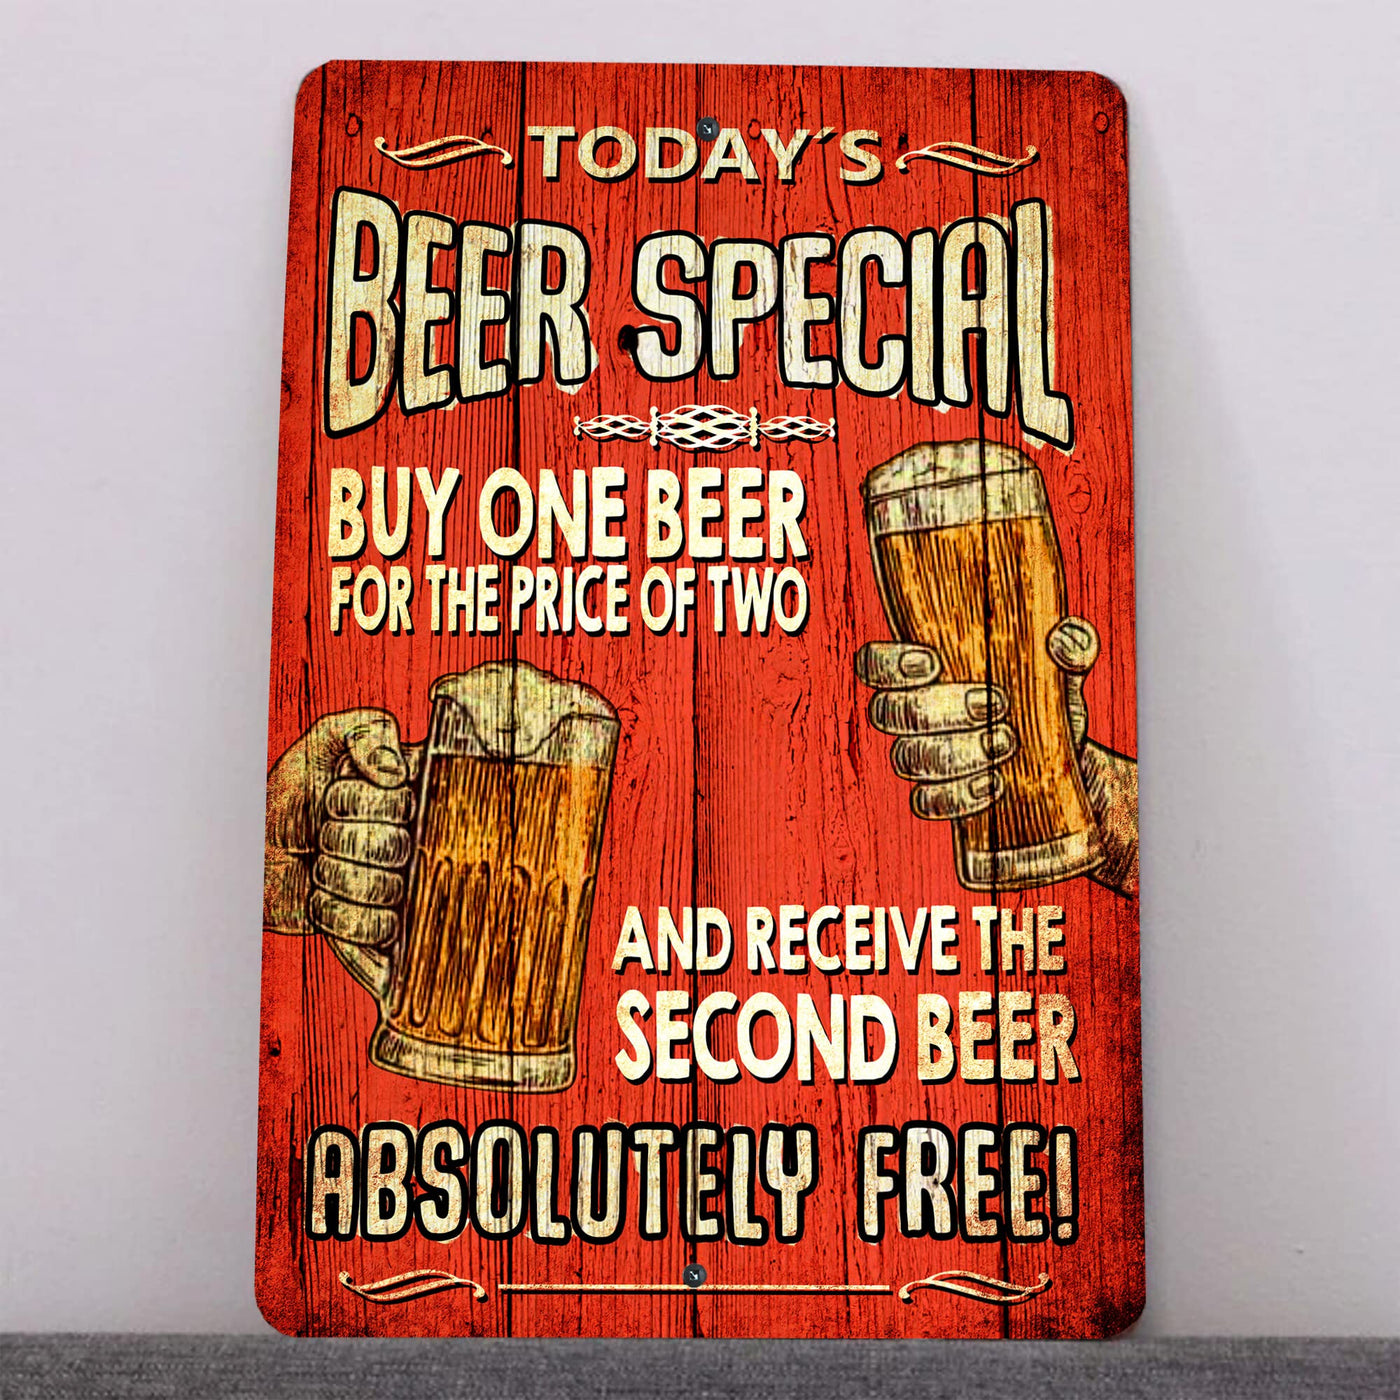 Today's Beer Special Metal Wall Art Vintage Sign -8 x 12 Inch Funny Beer Sign for Bar, Man Cave, Garage, Pub- Outdoor Rustic Tin Sign -Novelty Gift for Home, Patio, Tiki Bar, Beach House Decor!